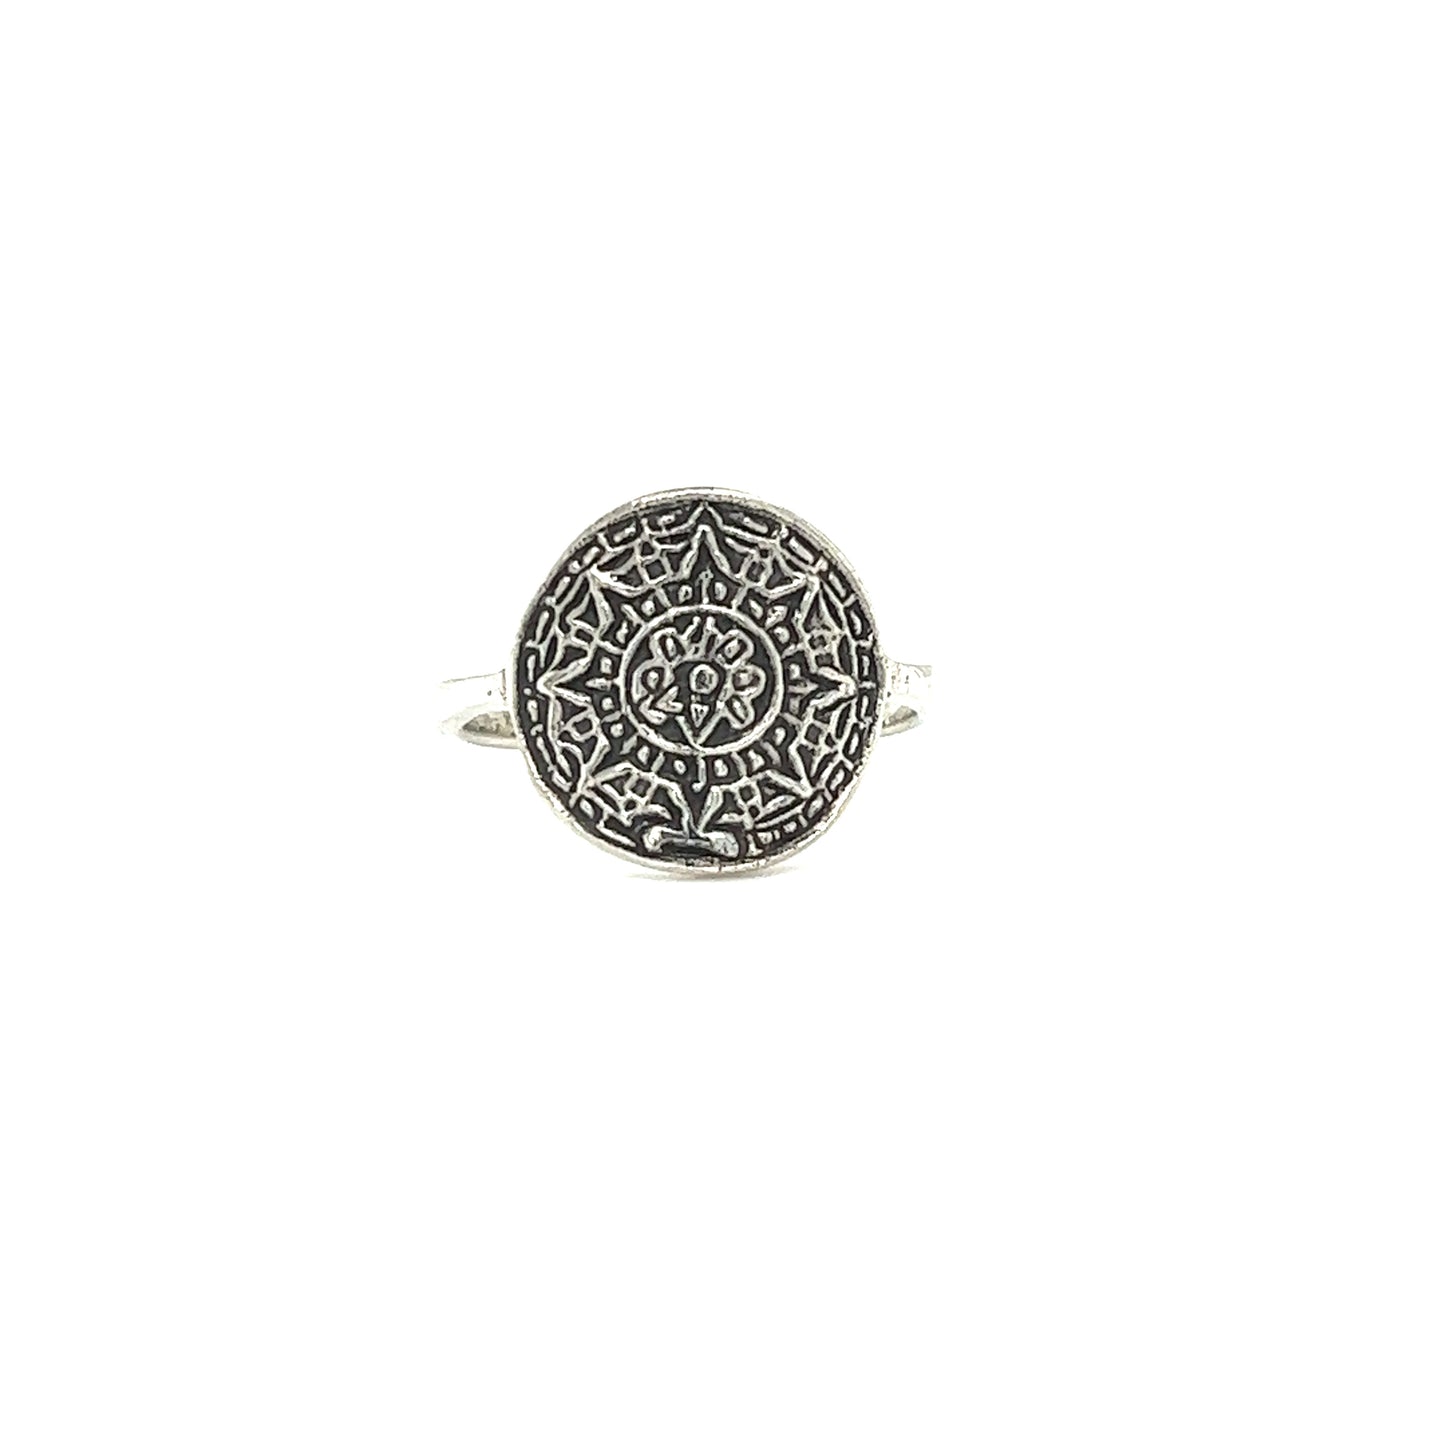 An ornate Super Silver Aztec Sun Ring adorned with a symbolic Sun God design, reminiscent of the ancient Aztec civilization.